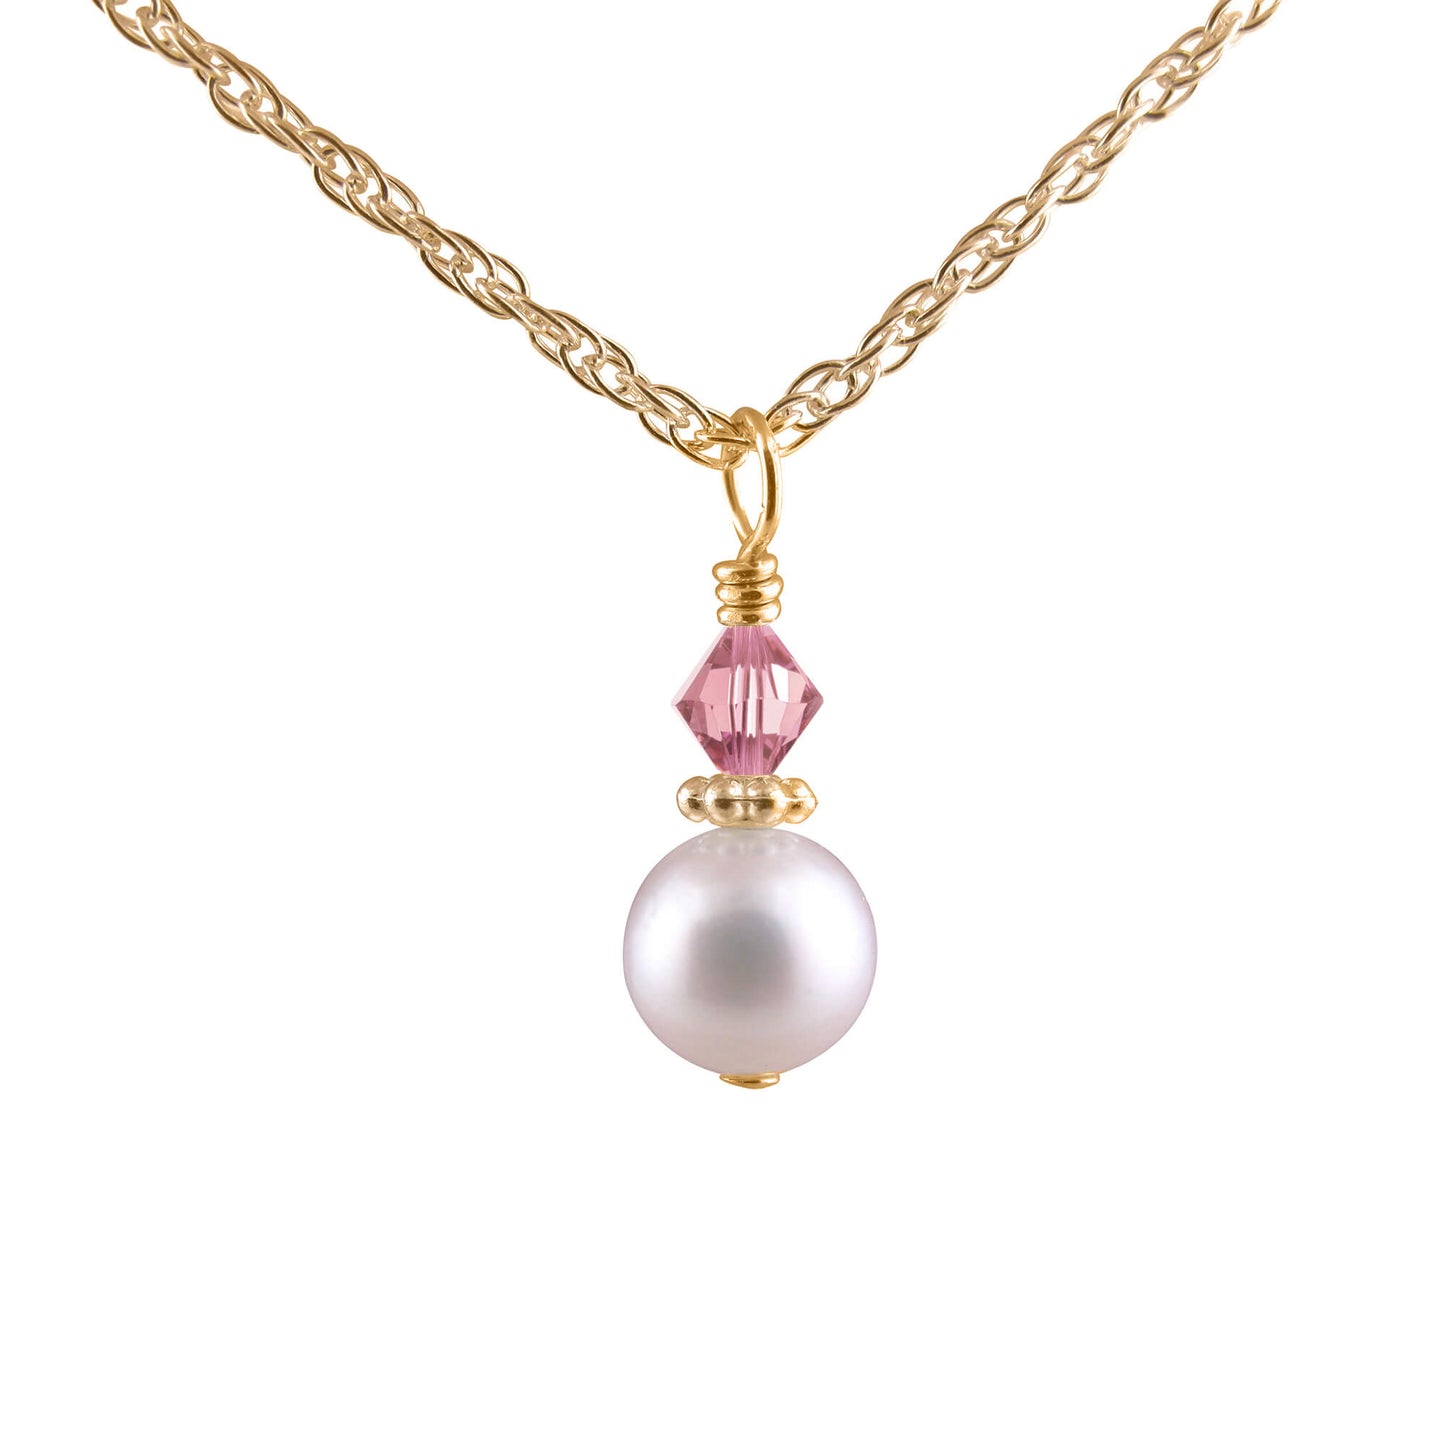 Darling my keepsake pearl and crystal necklace in gold.